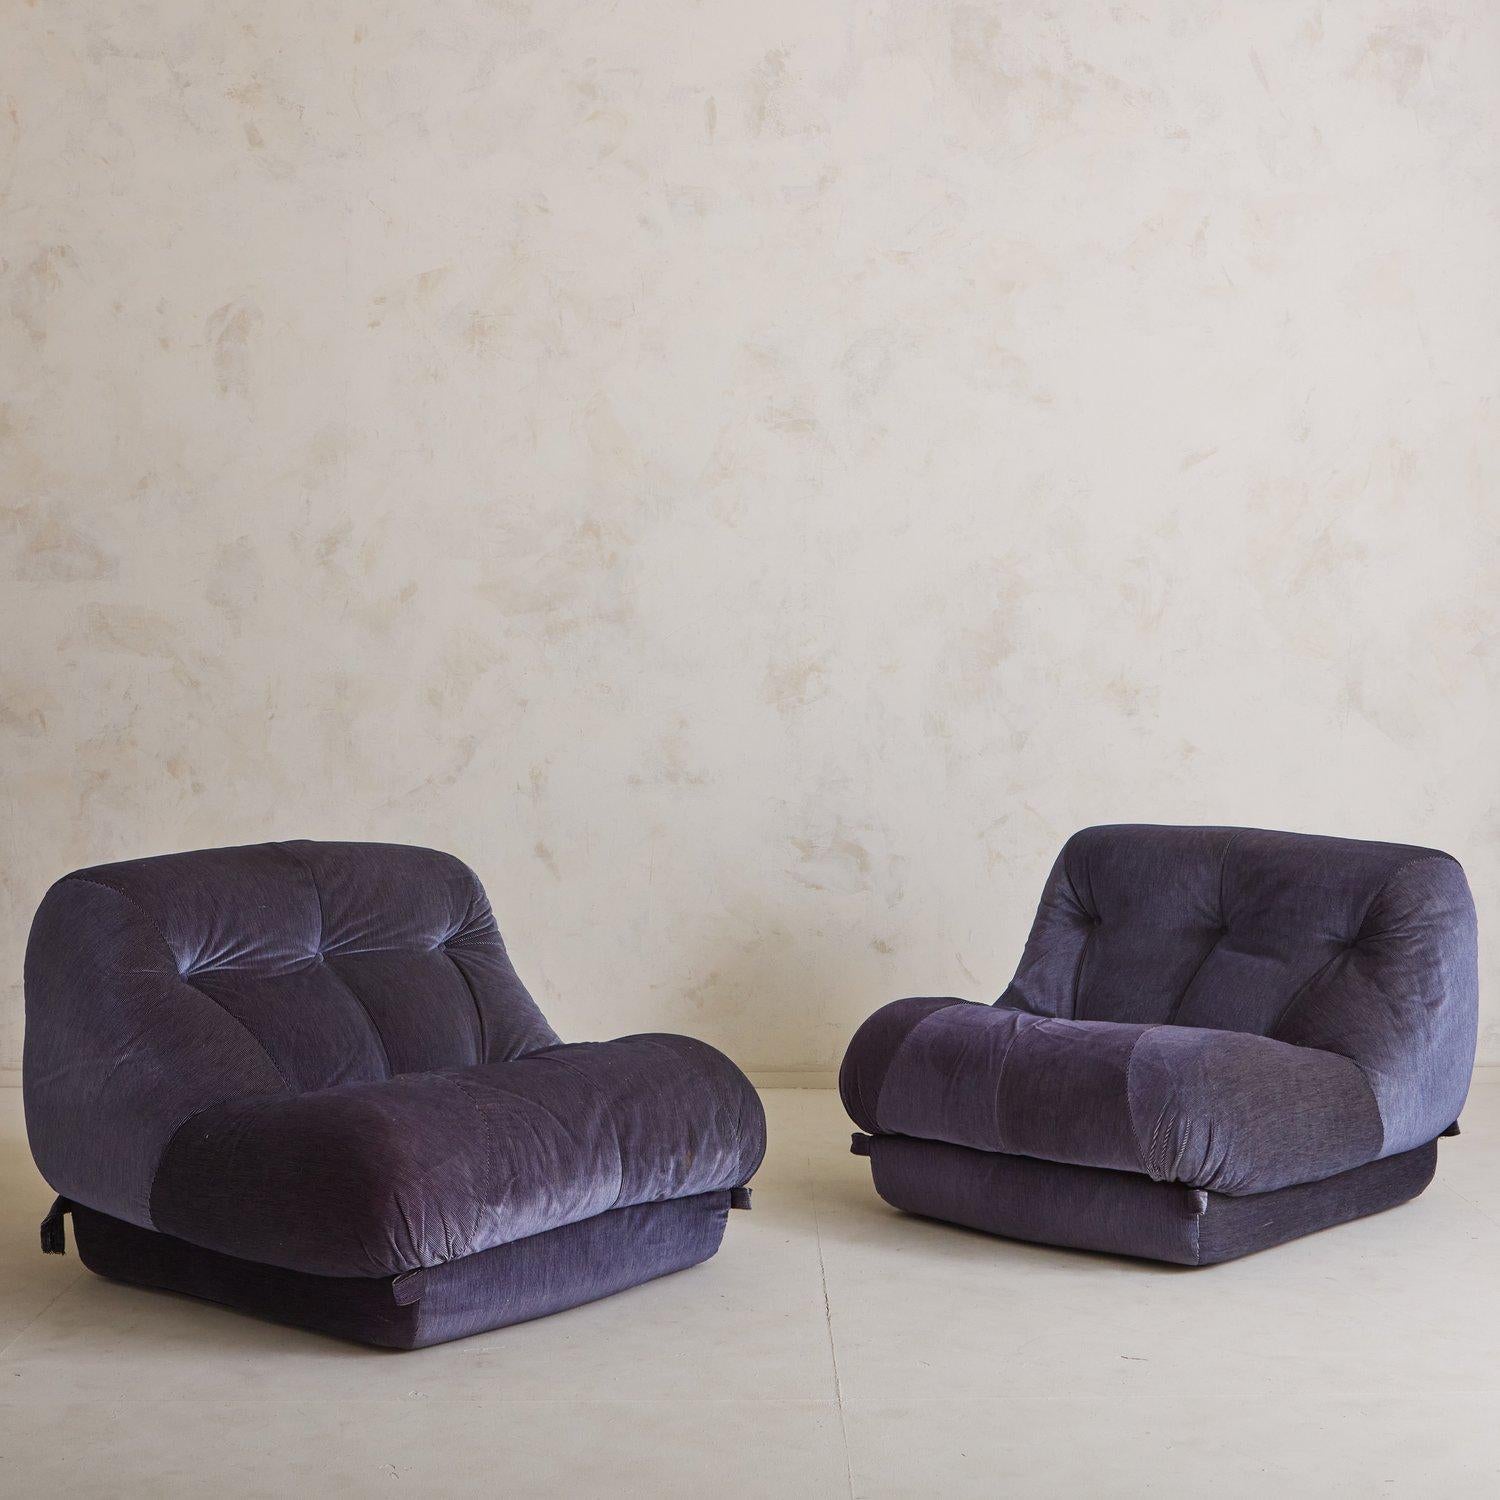 A pair of vintage Italian lounge chairs by Rino Maturi for MIMO Padova. These statement chairs feature original purple corduroy upholstery with dramatic tufting. Labeled on bottom “Mod. Depositato Nuvolone Mimo J Padova.” Sourced in Italy, 1970s.